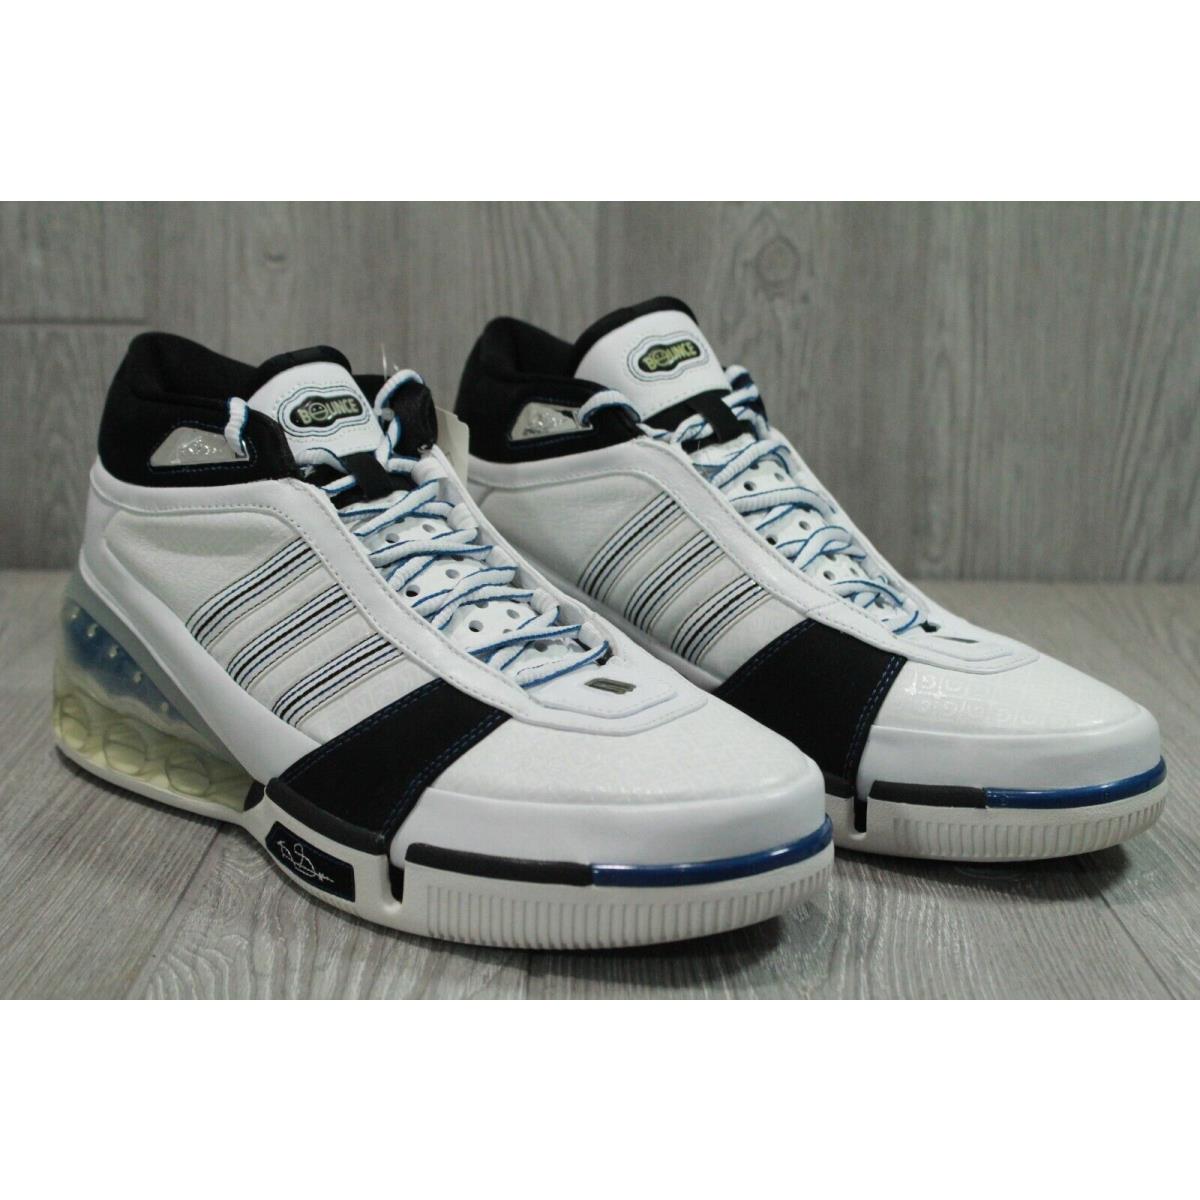 Adidas shoes Bounce - White 1